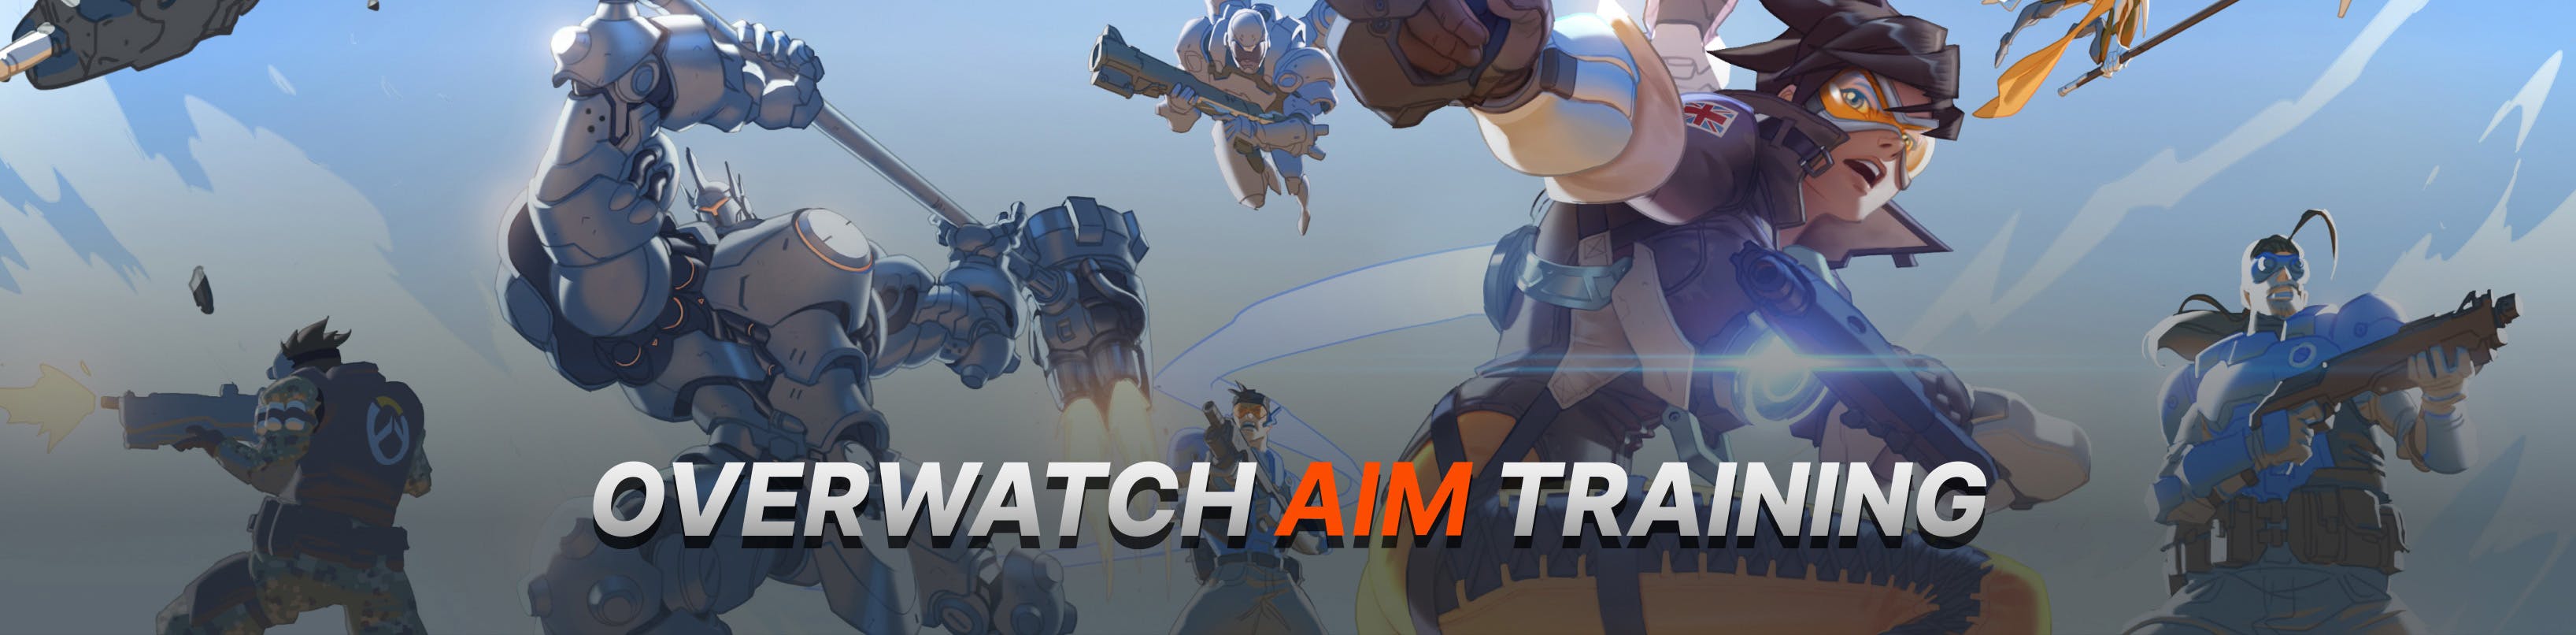 Overwatch 2 Aim Trainer Guide - 3D Aim Trainer